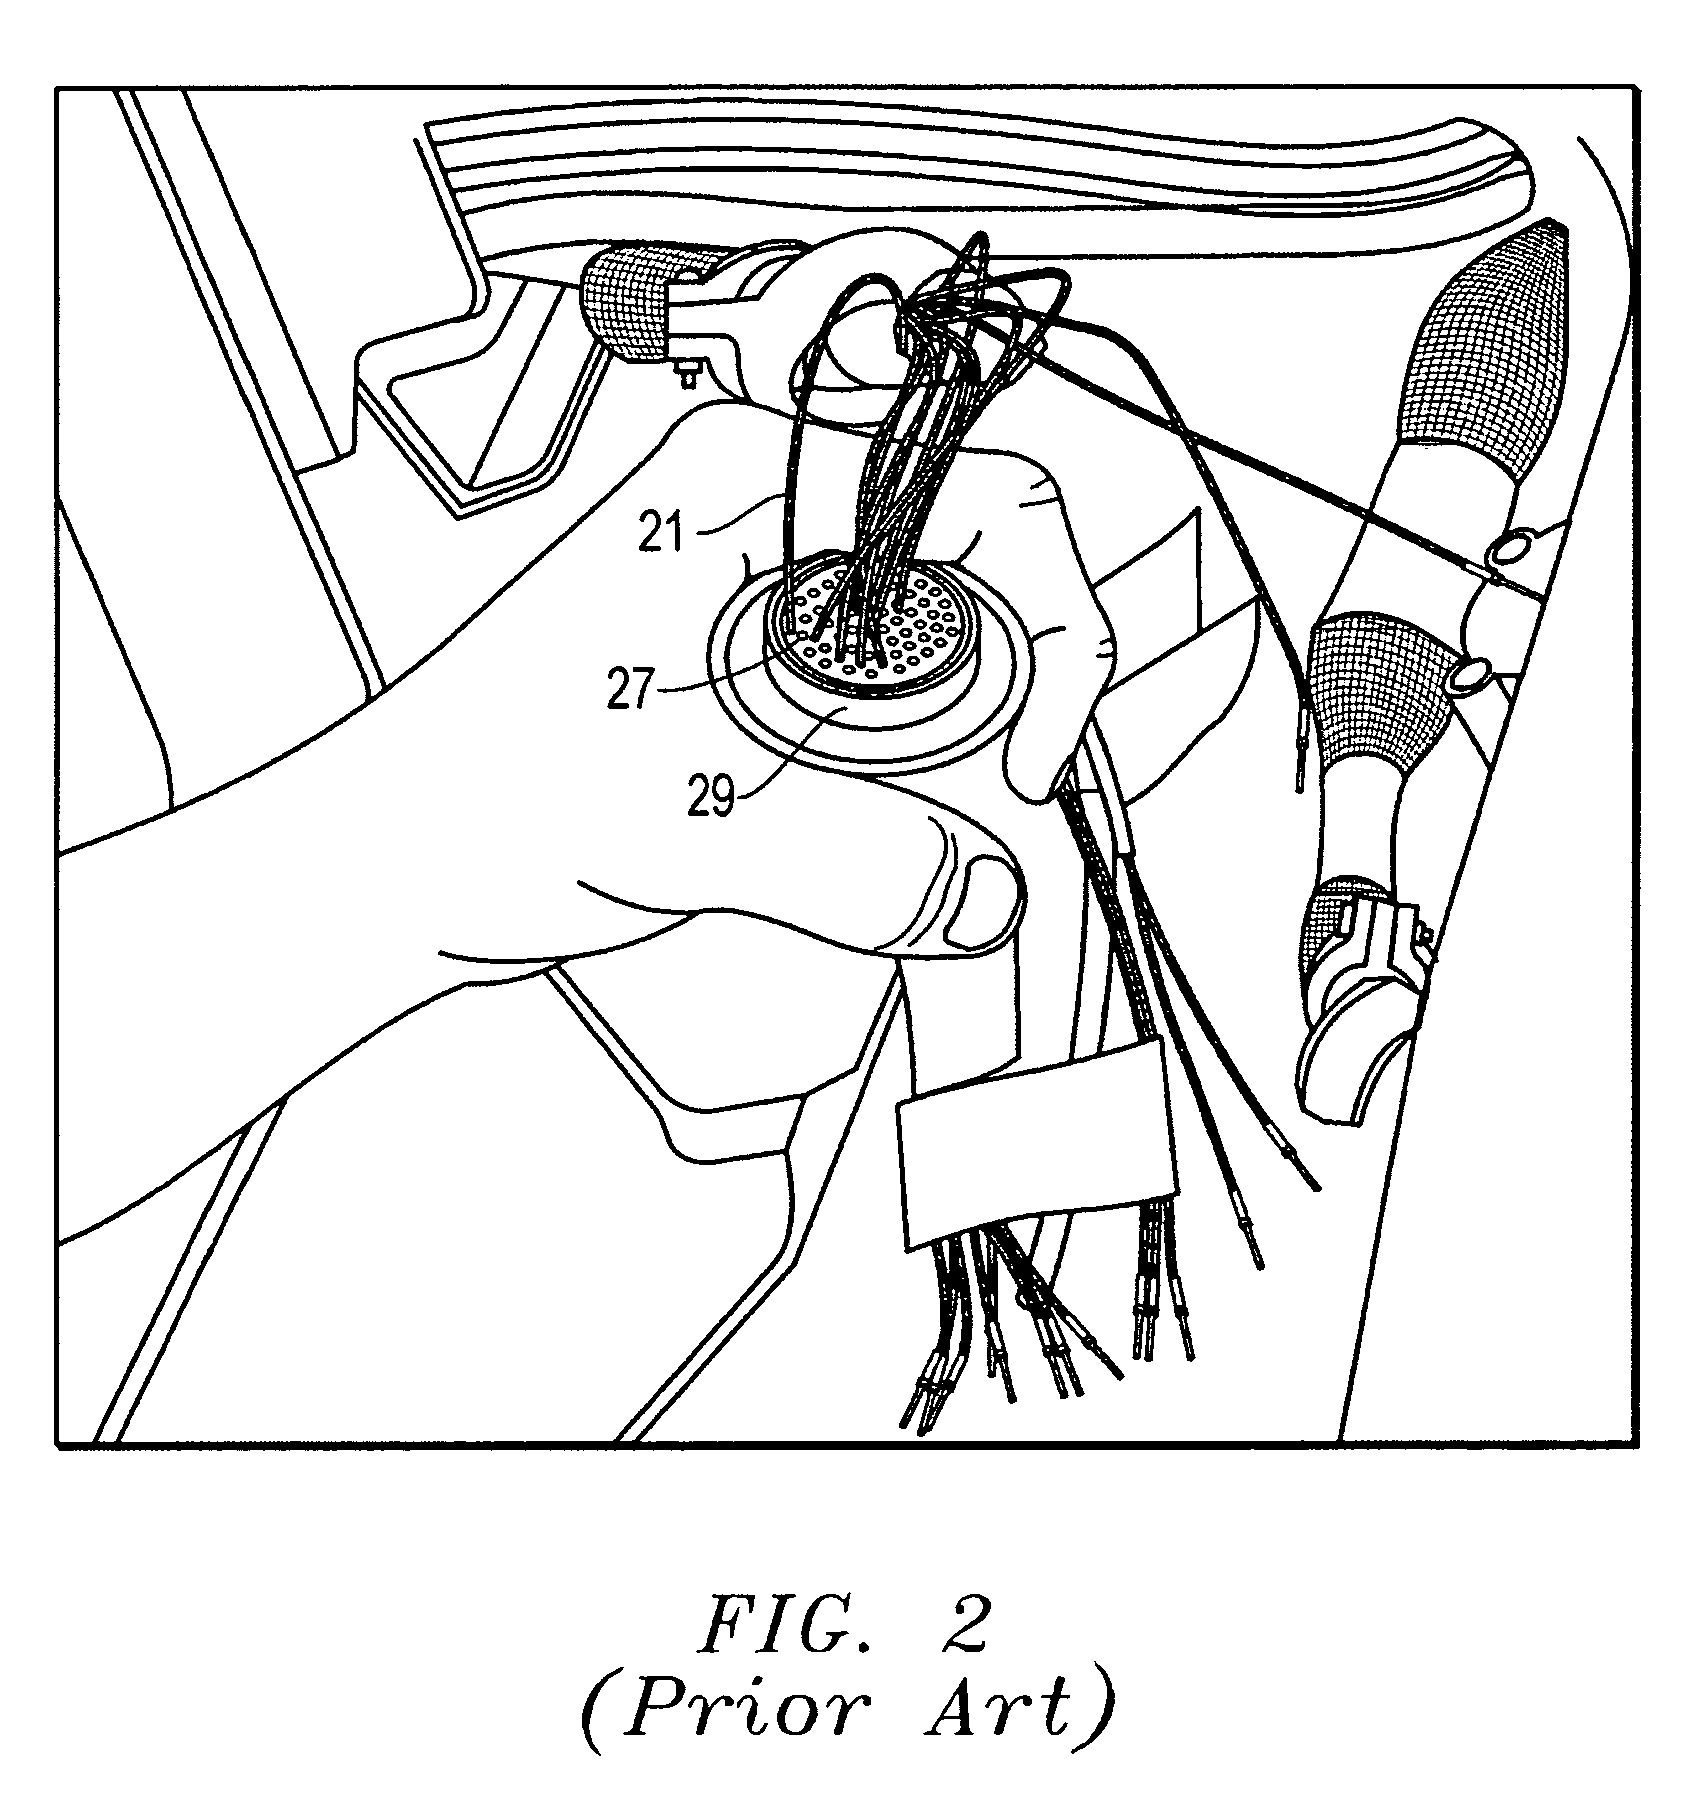 System, for matching harnesses of conductors with apertures in connectors